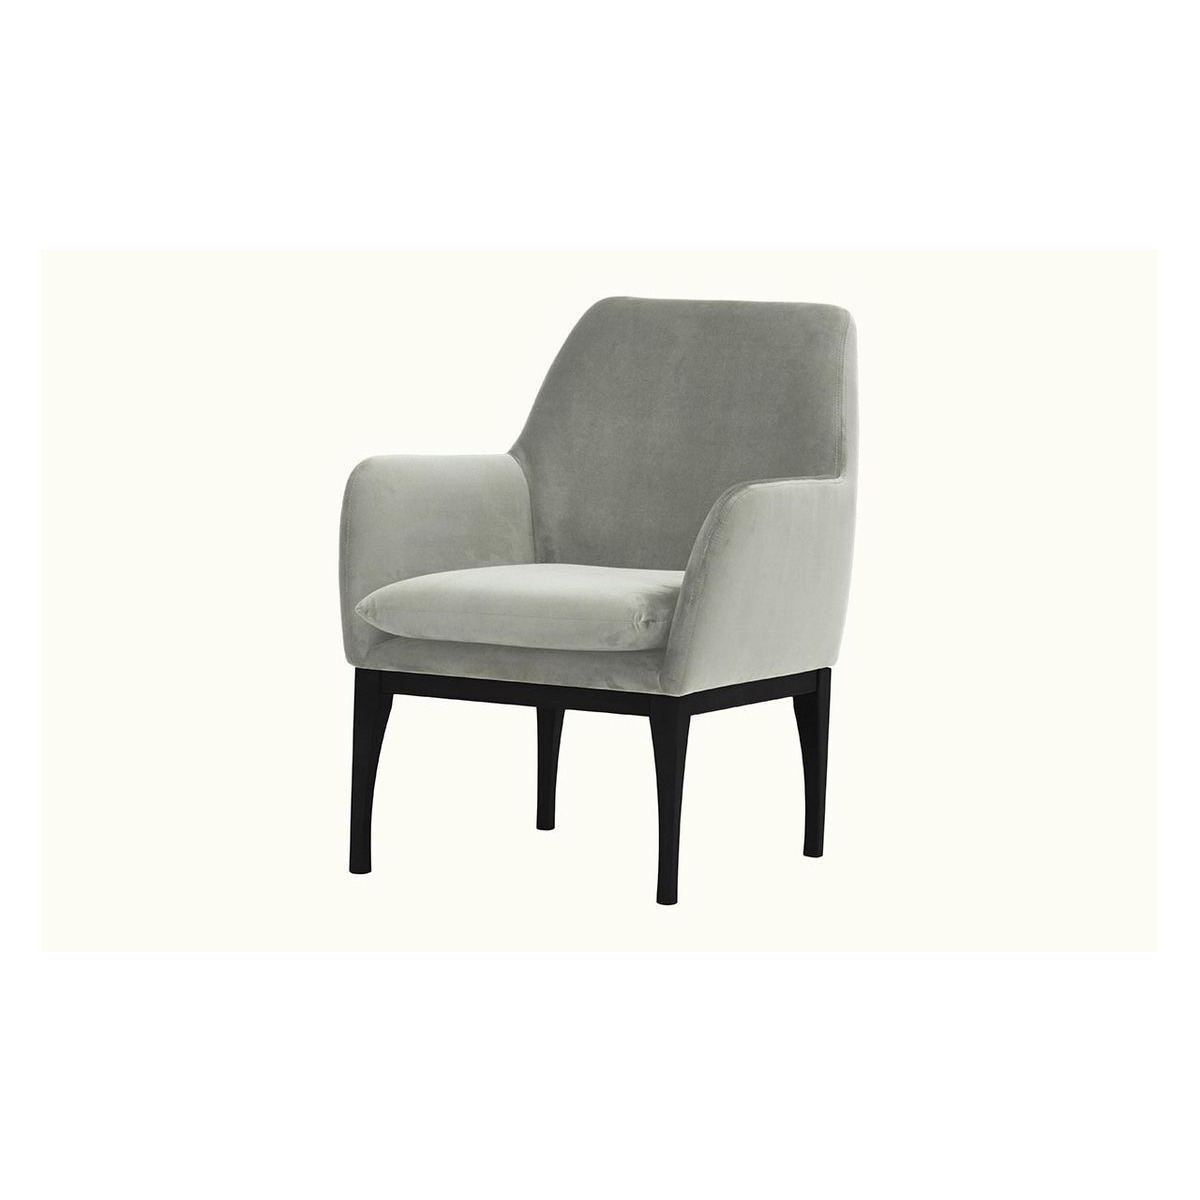 Beca Armchair with Wooden Legs, silver, Leg colour: black - image 1